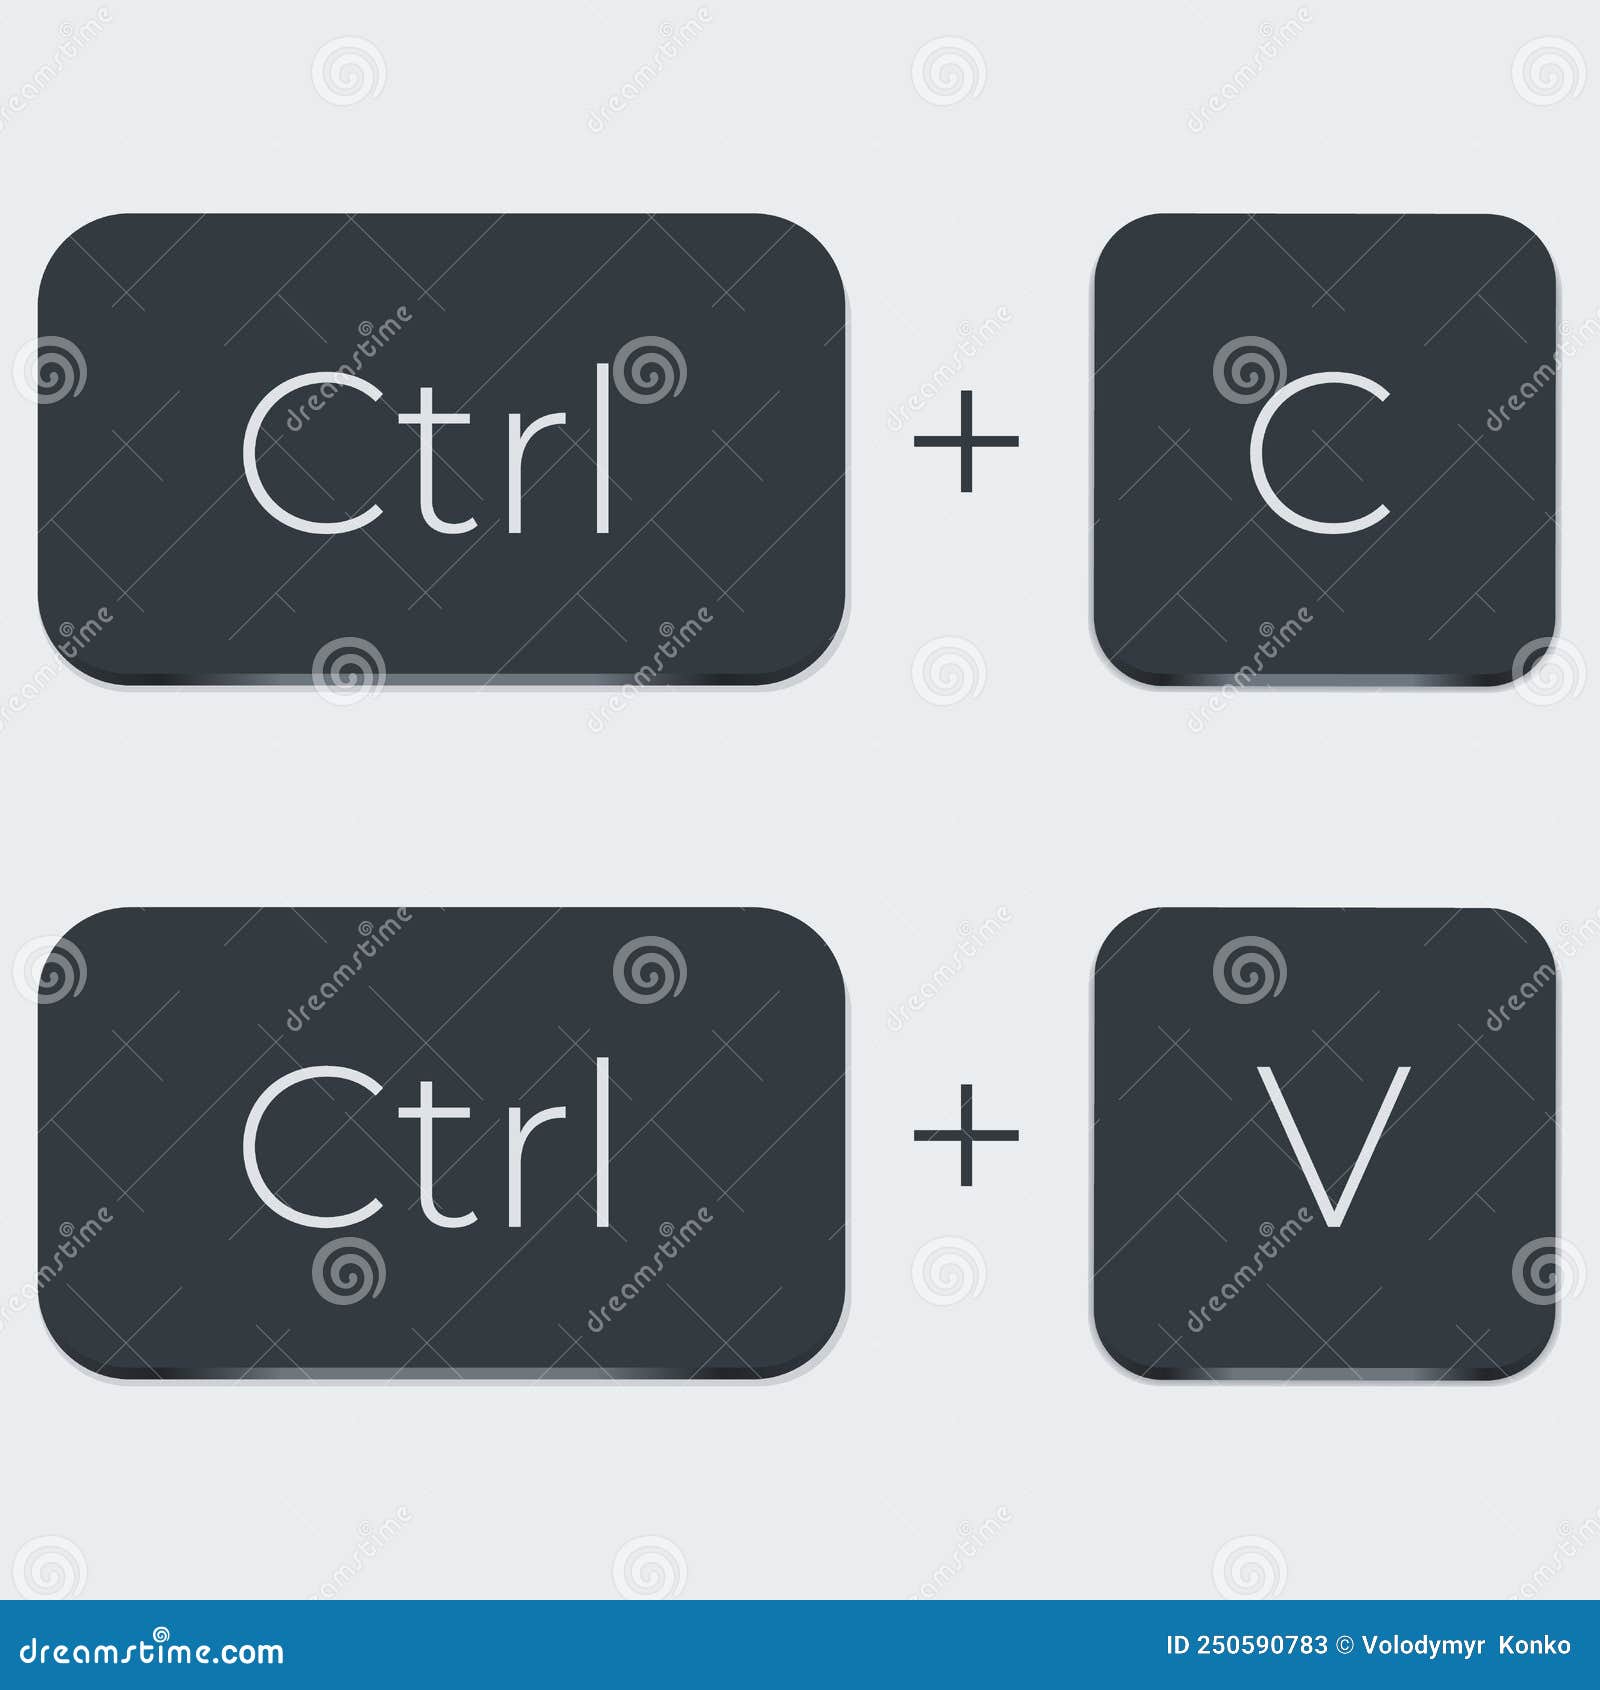 ctrl c and ctrl v computer keyboard buttons. desktop interface. web icon